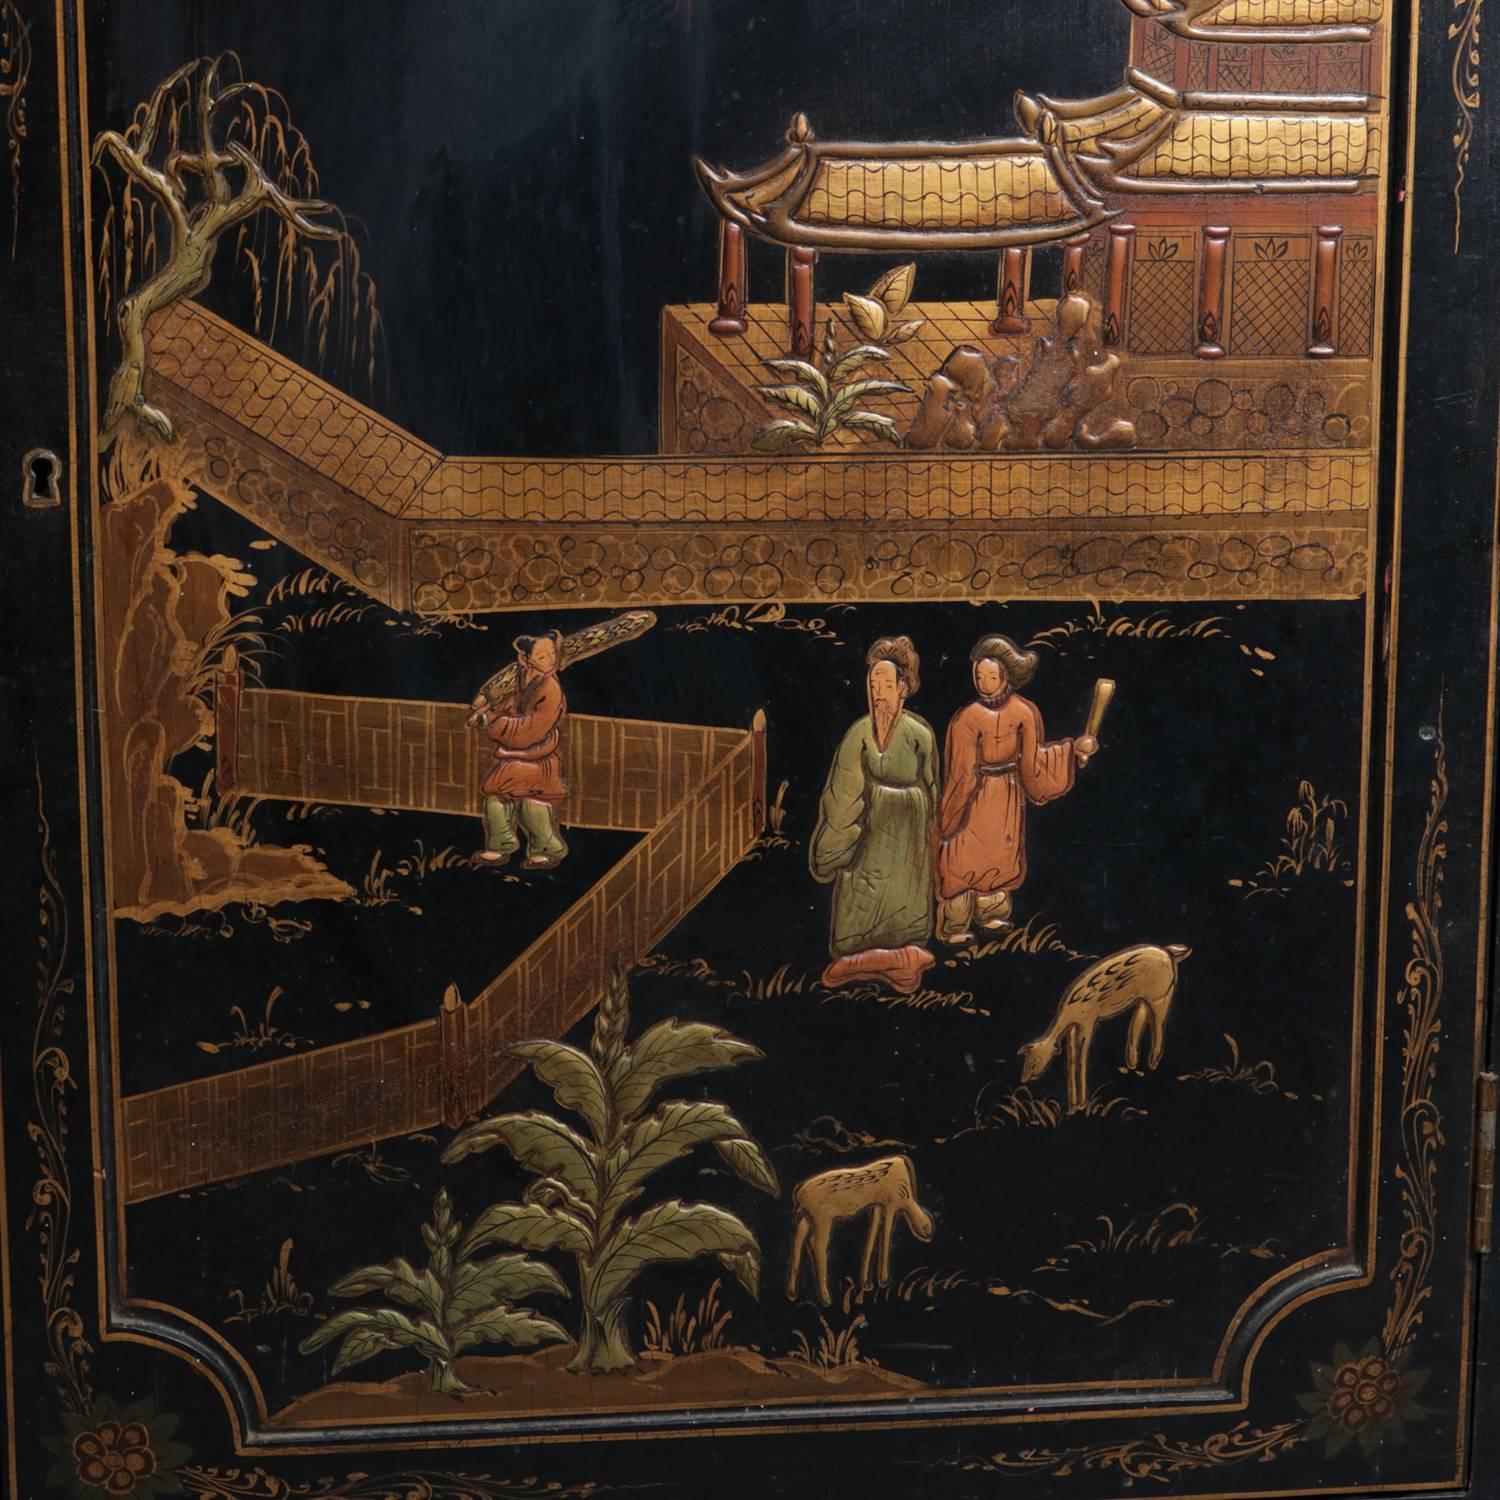 Vintage Chinoiserie two-door credenza features carved and ebonized construction with hand painted and gilt polychrome village farm scenes with villagers, animals and pagoda, gilt floral accents and banding, 20th century.

Measures: 37.5